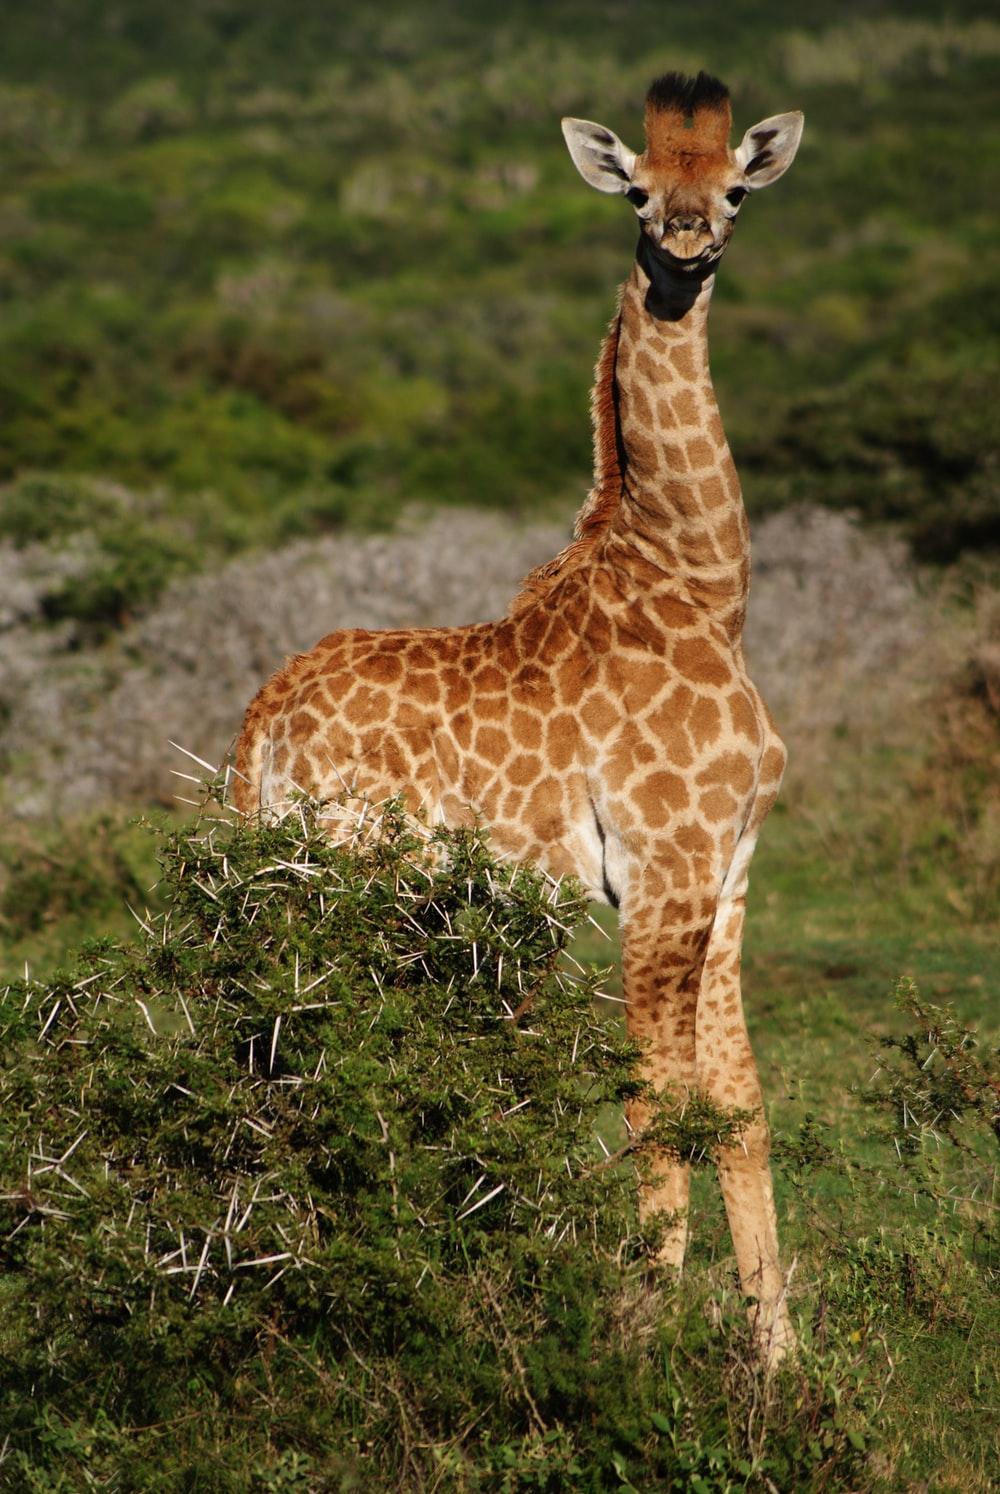 Baby Giraffe Picture. Download Free Image